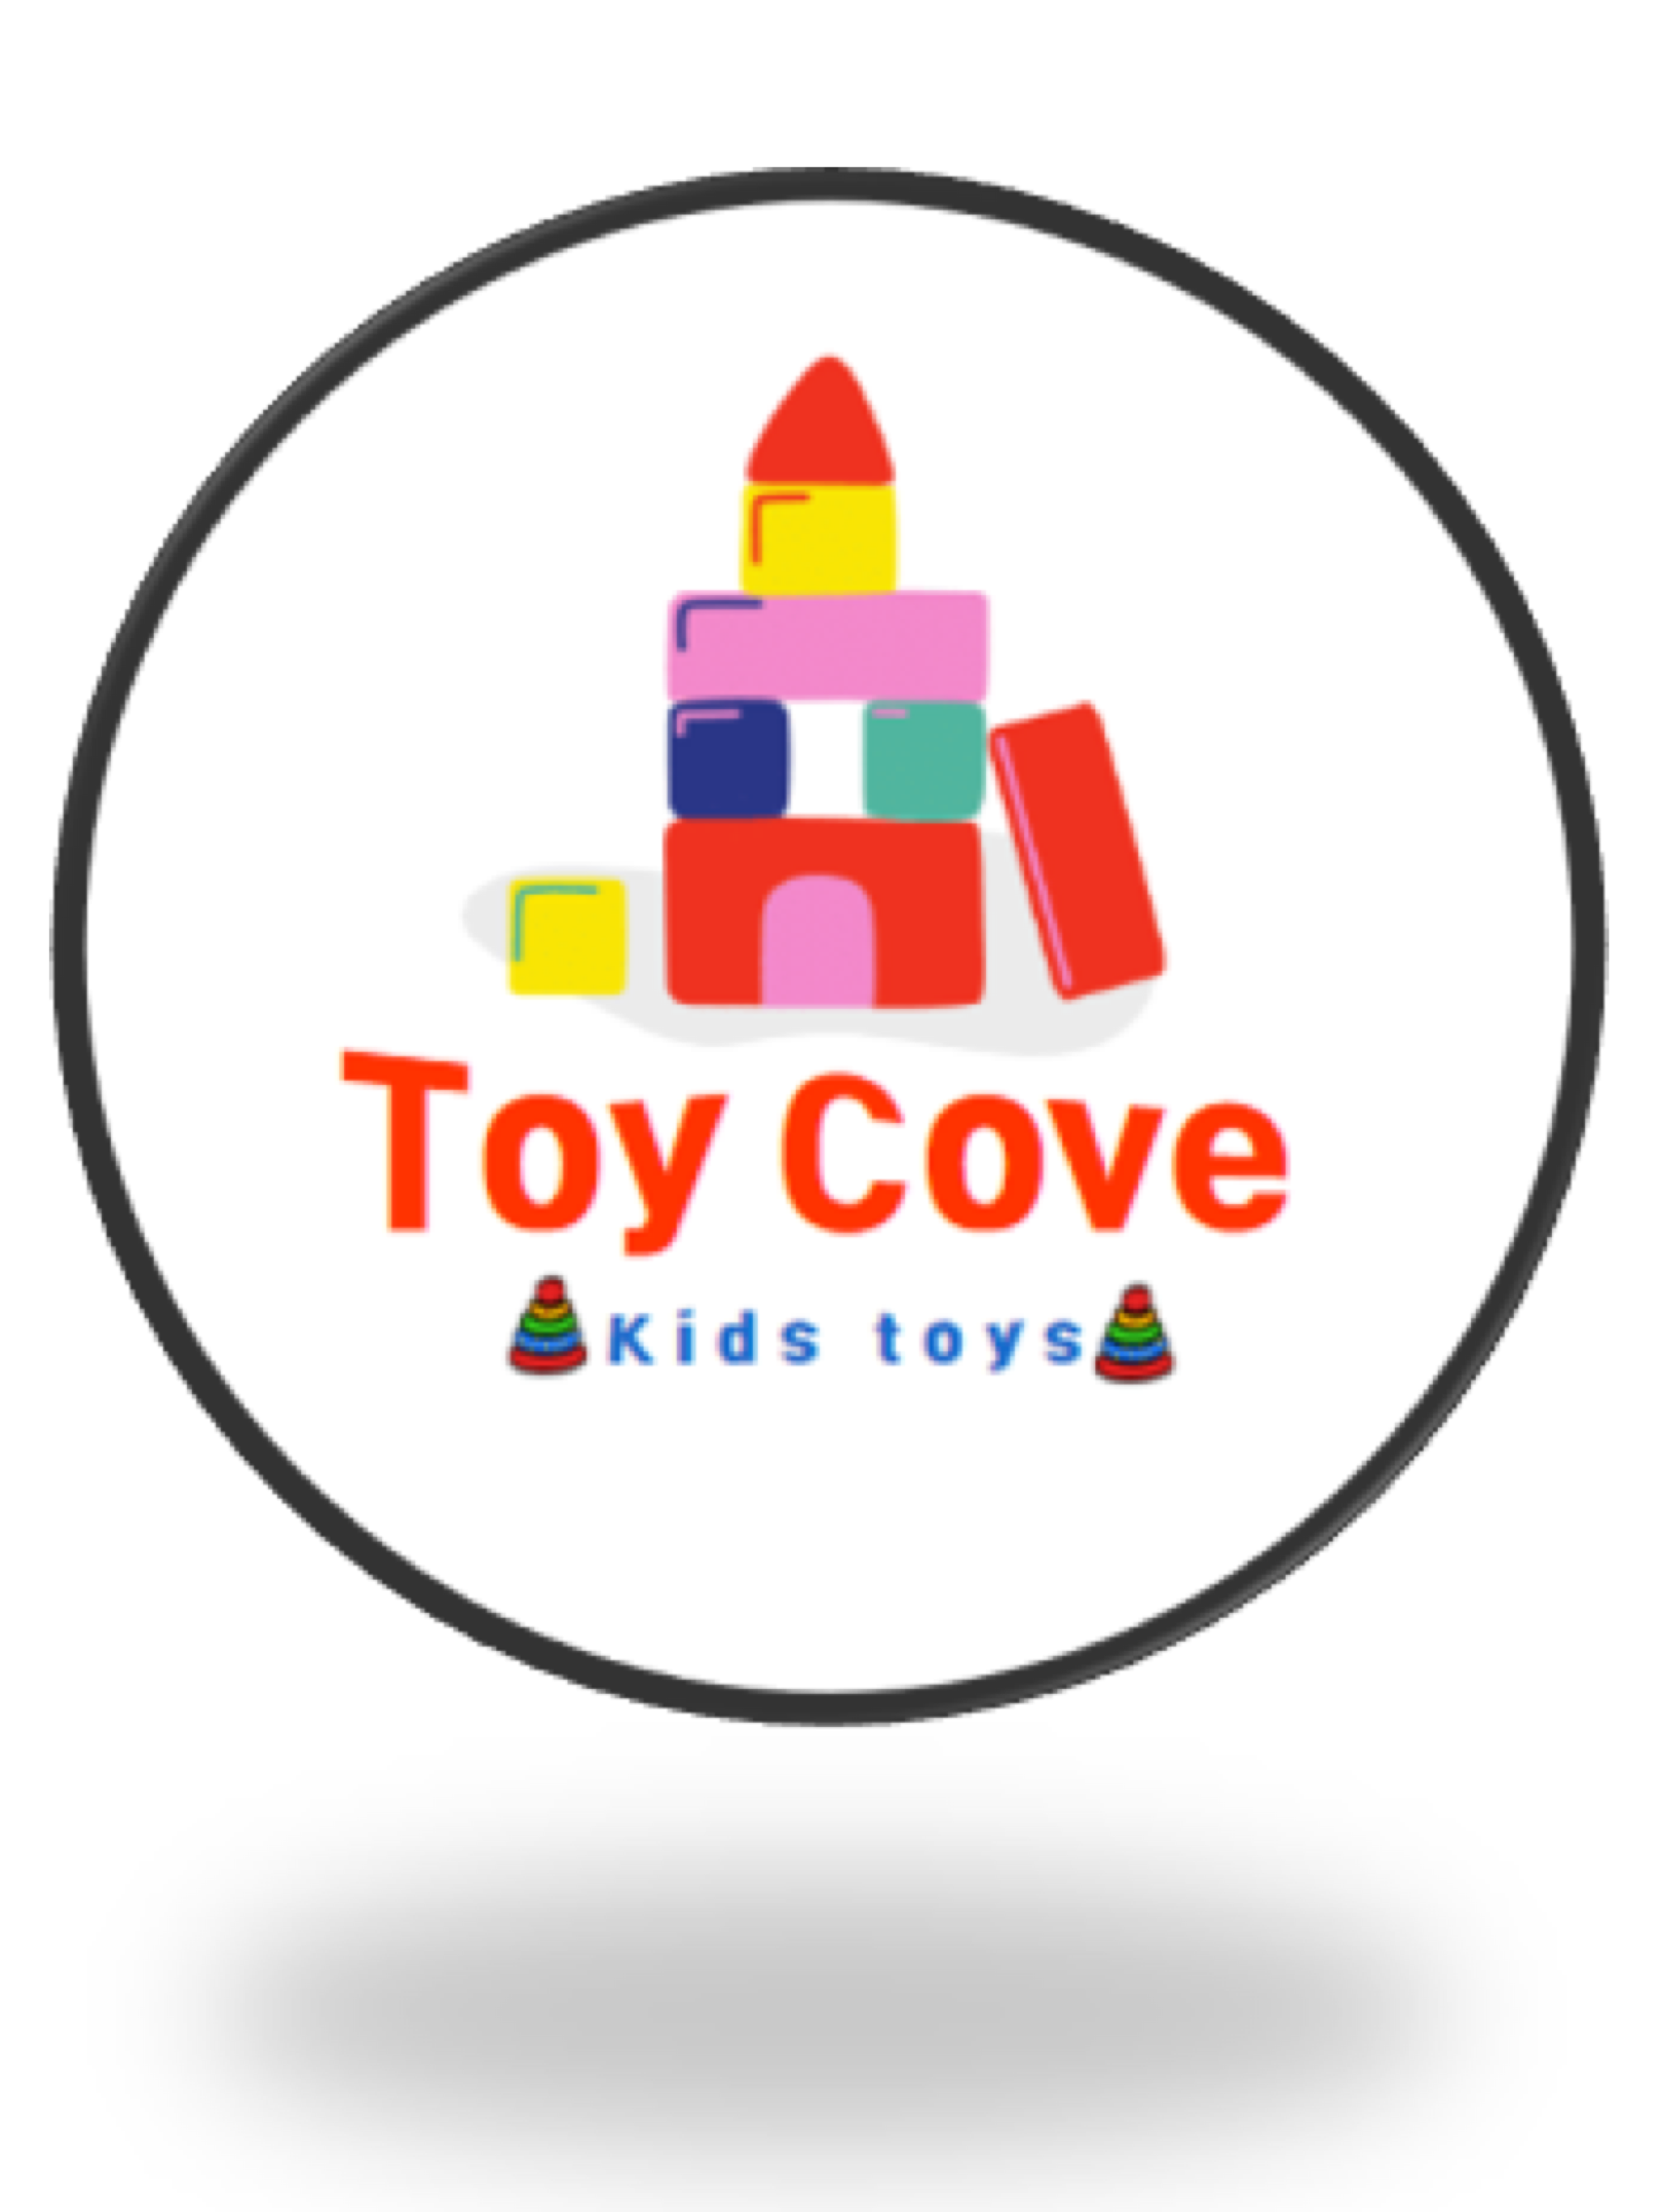 The Toy Cove